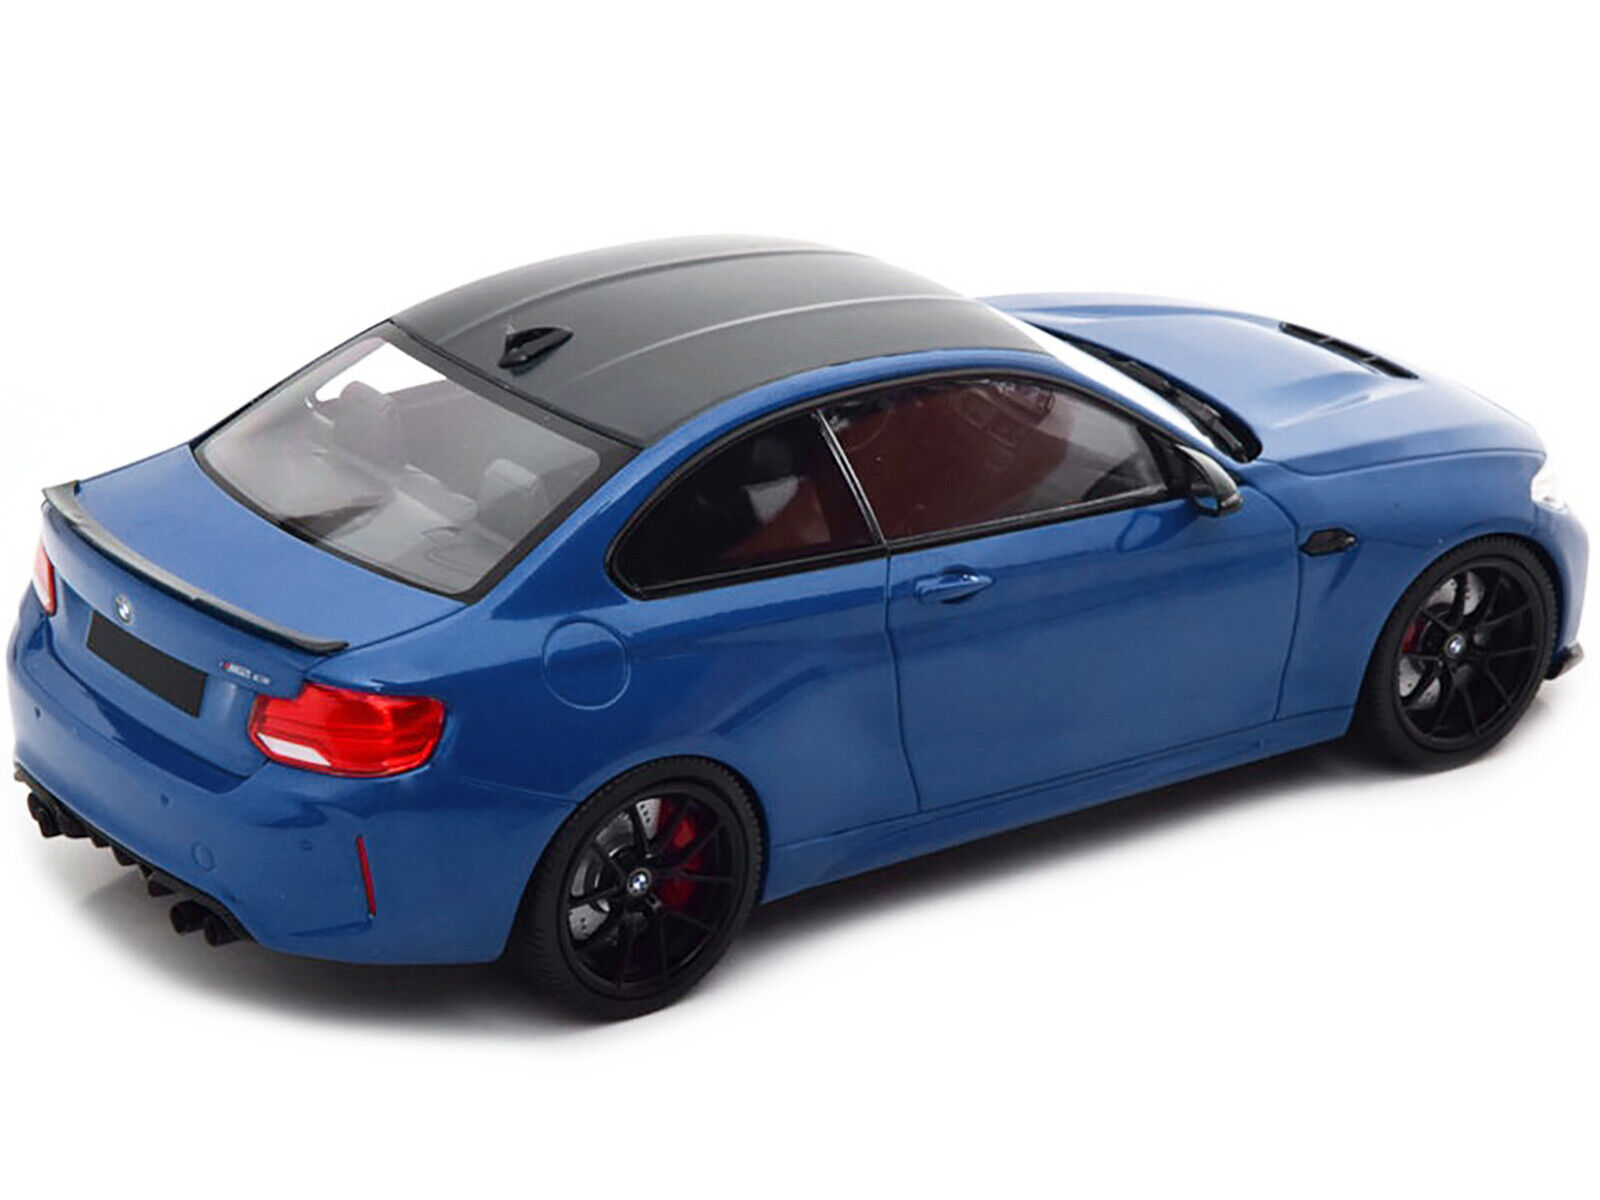 2020 BMW M2 CS Blue Metallic with Carbon Top 1/18 Diecast Model Car by